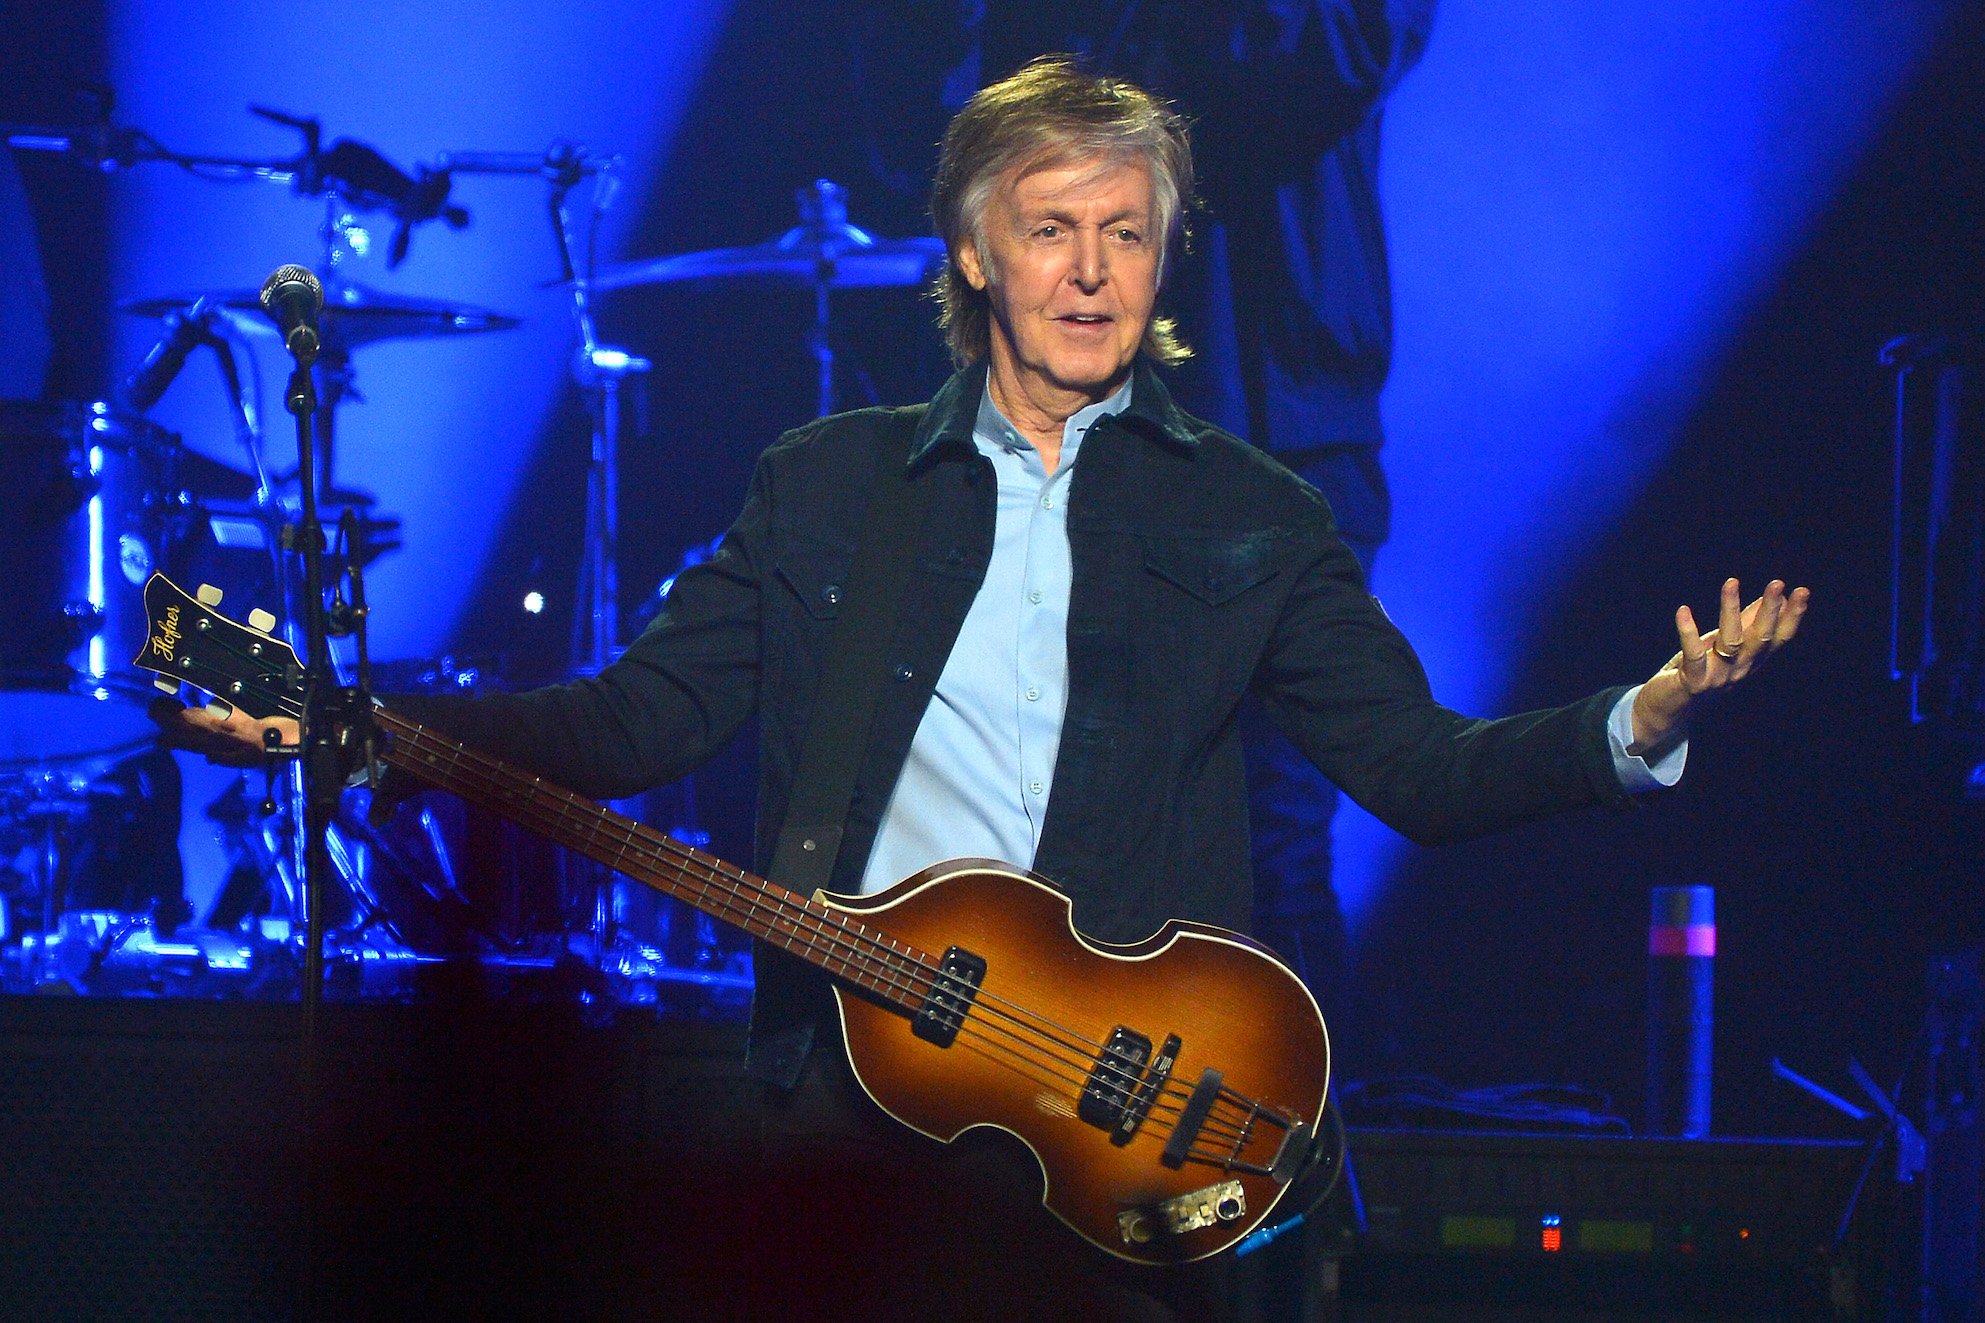 Paul McCartney performs with his guiat at the O2 Arena during his Freshen Up tour in London, England